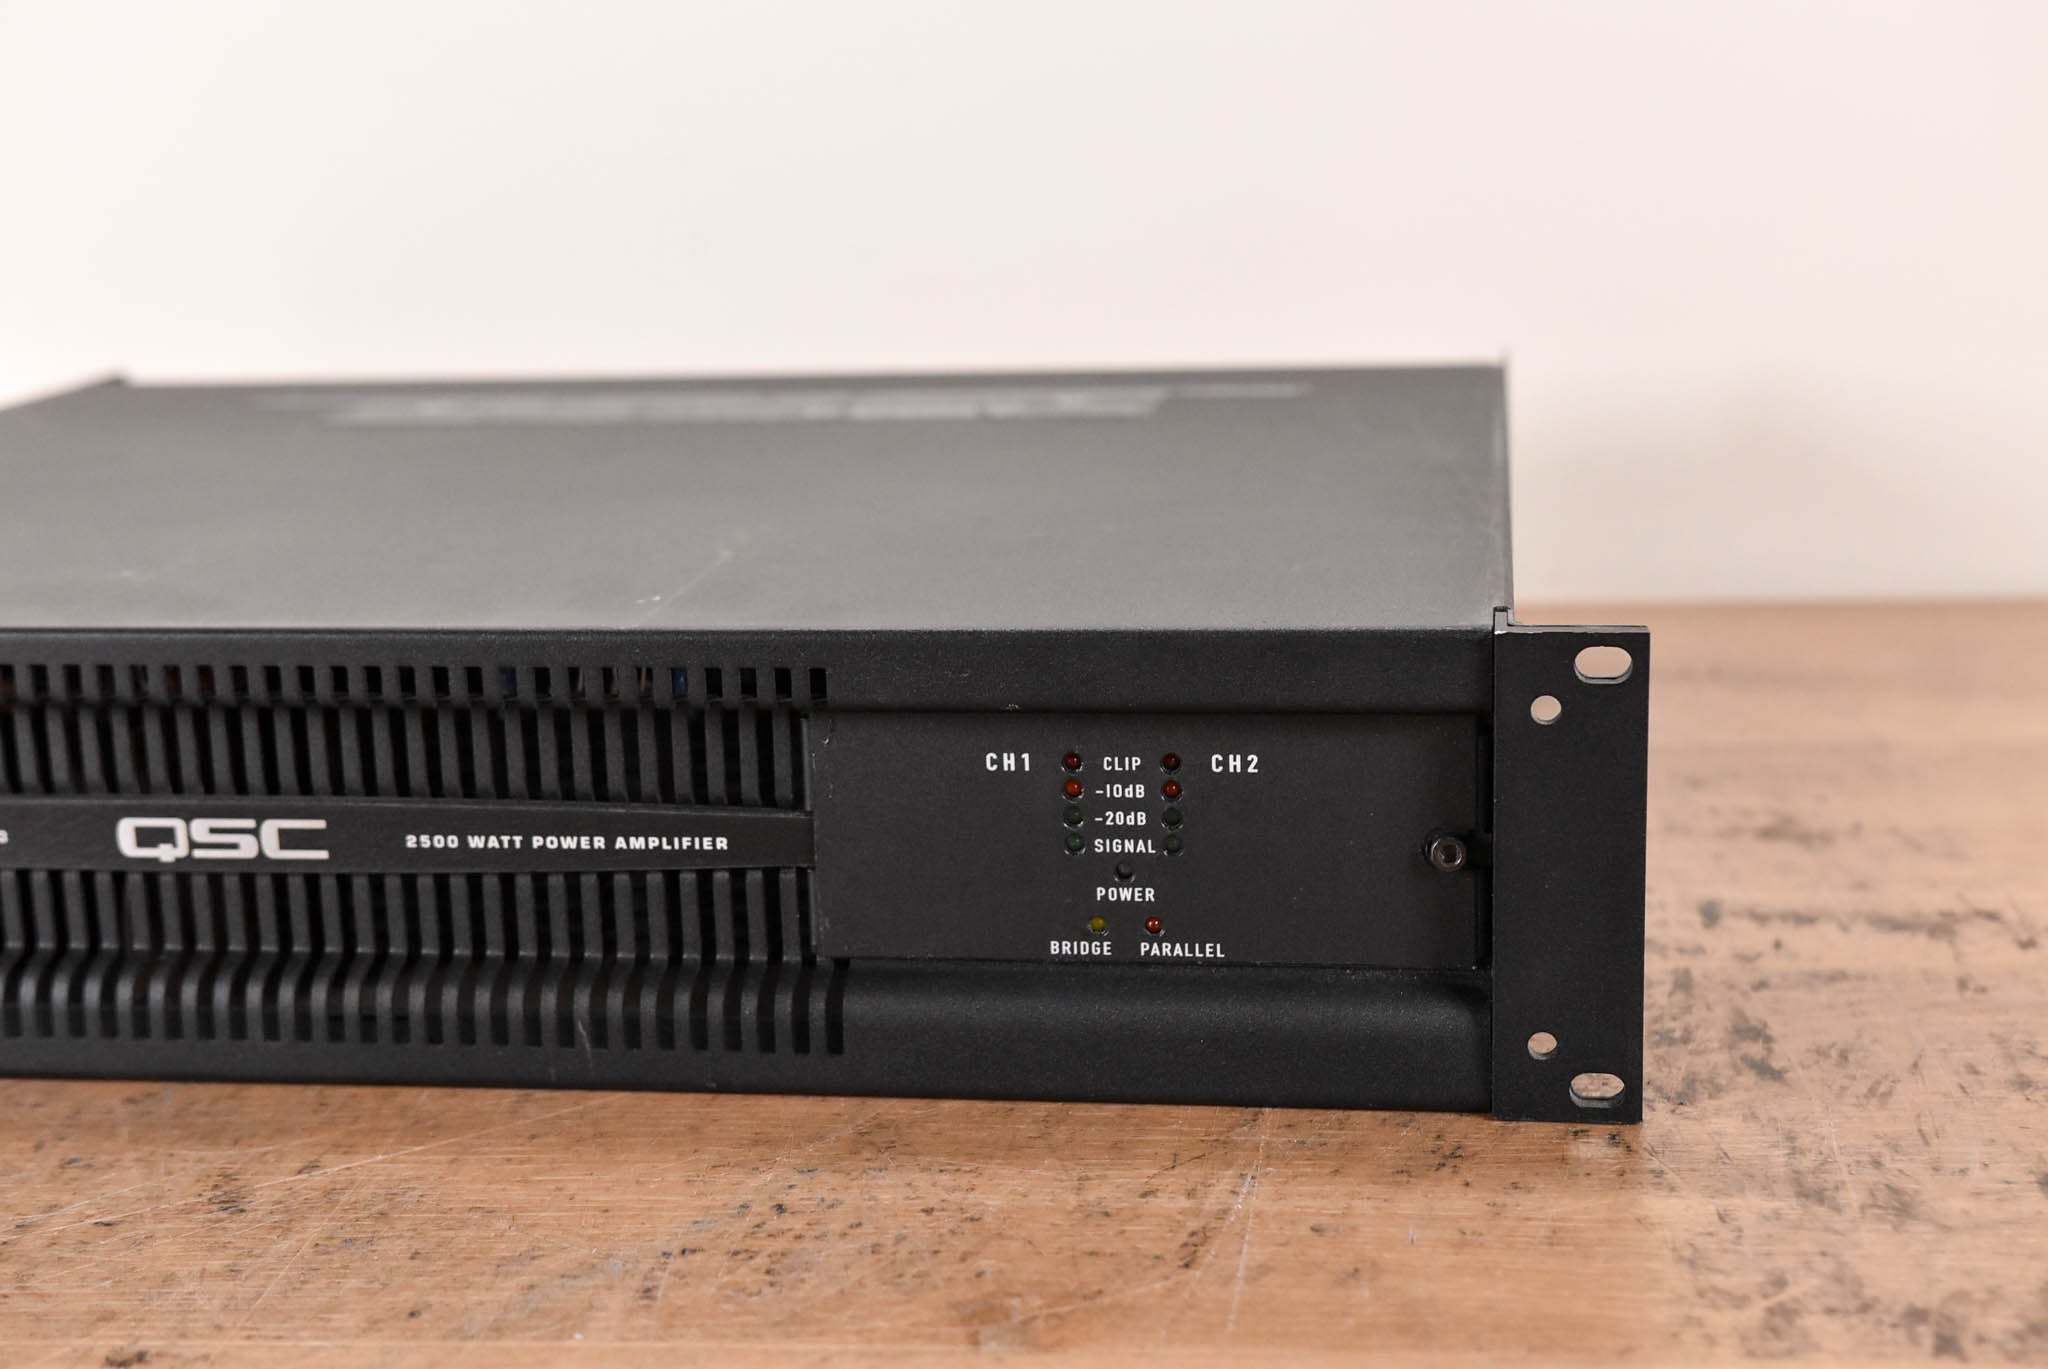 QSC PL325 Powerlight 3 Series Two-Channel Power Amplifier